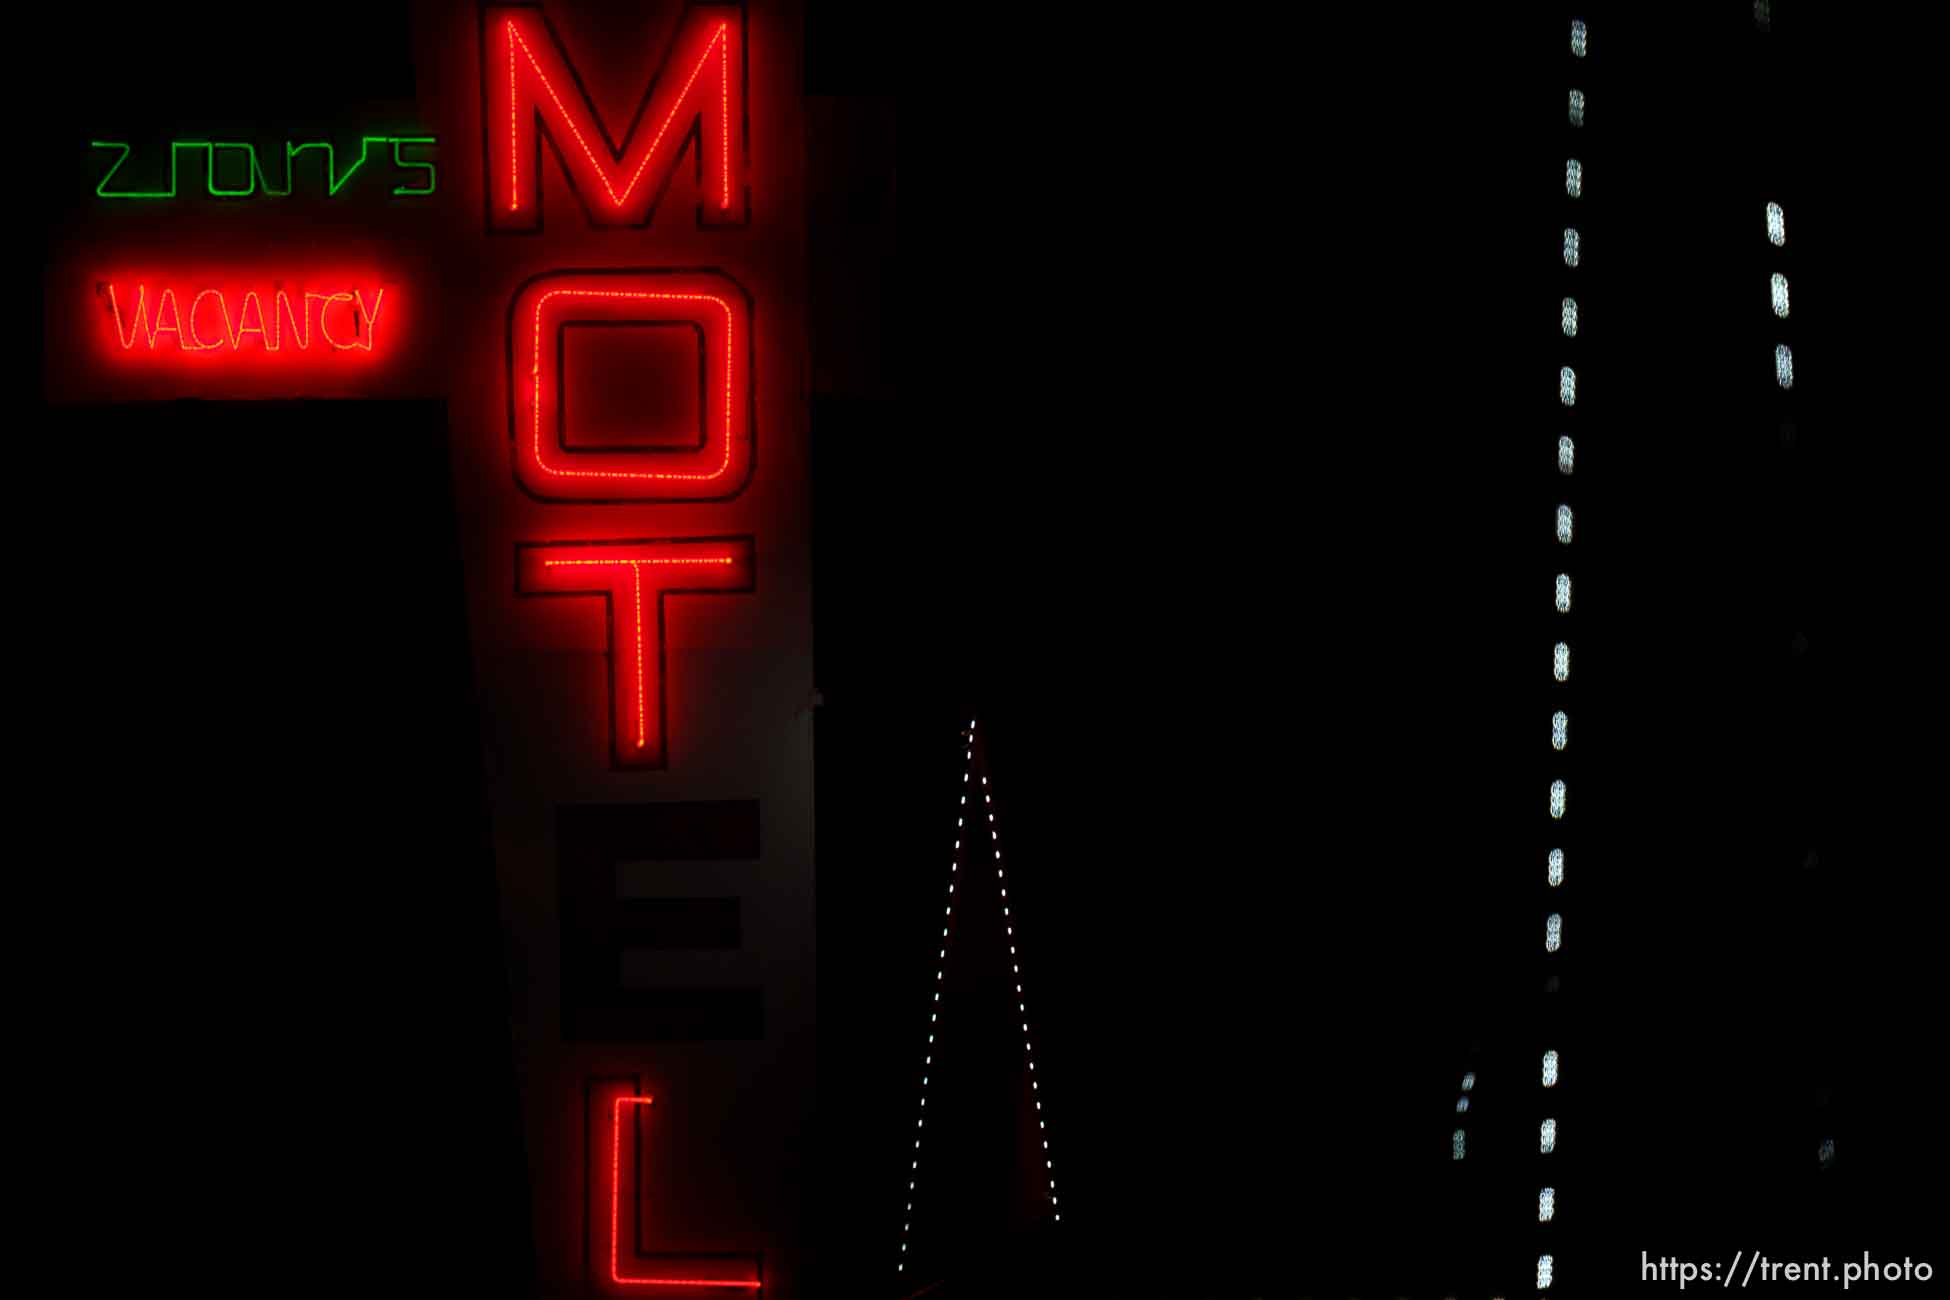 Zions Motel, State Street, on Tuesday, Dec. 7, 2021.